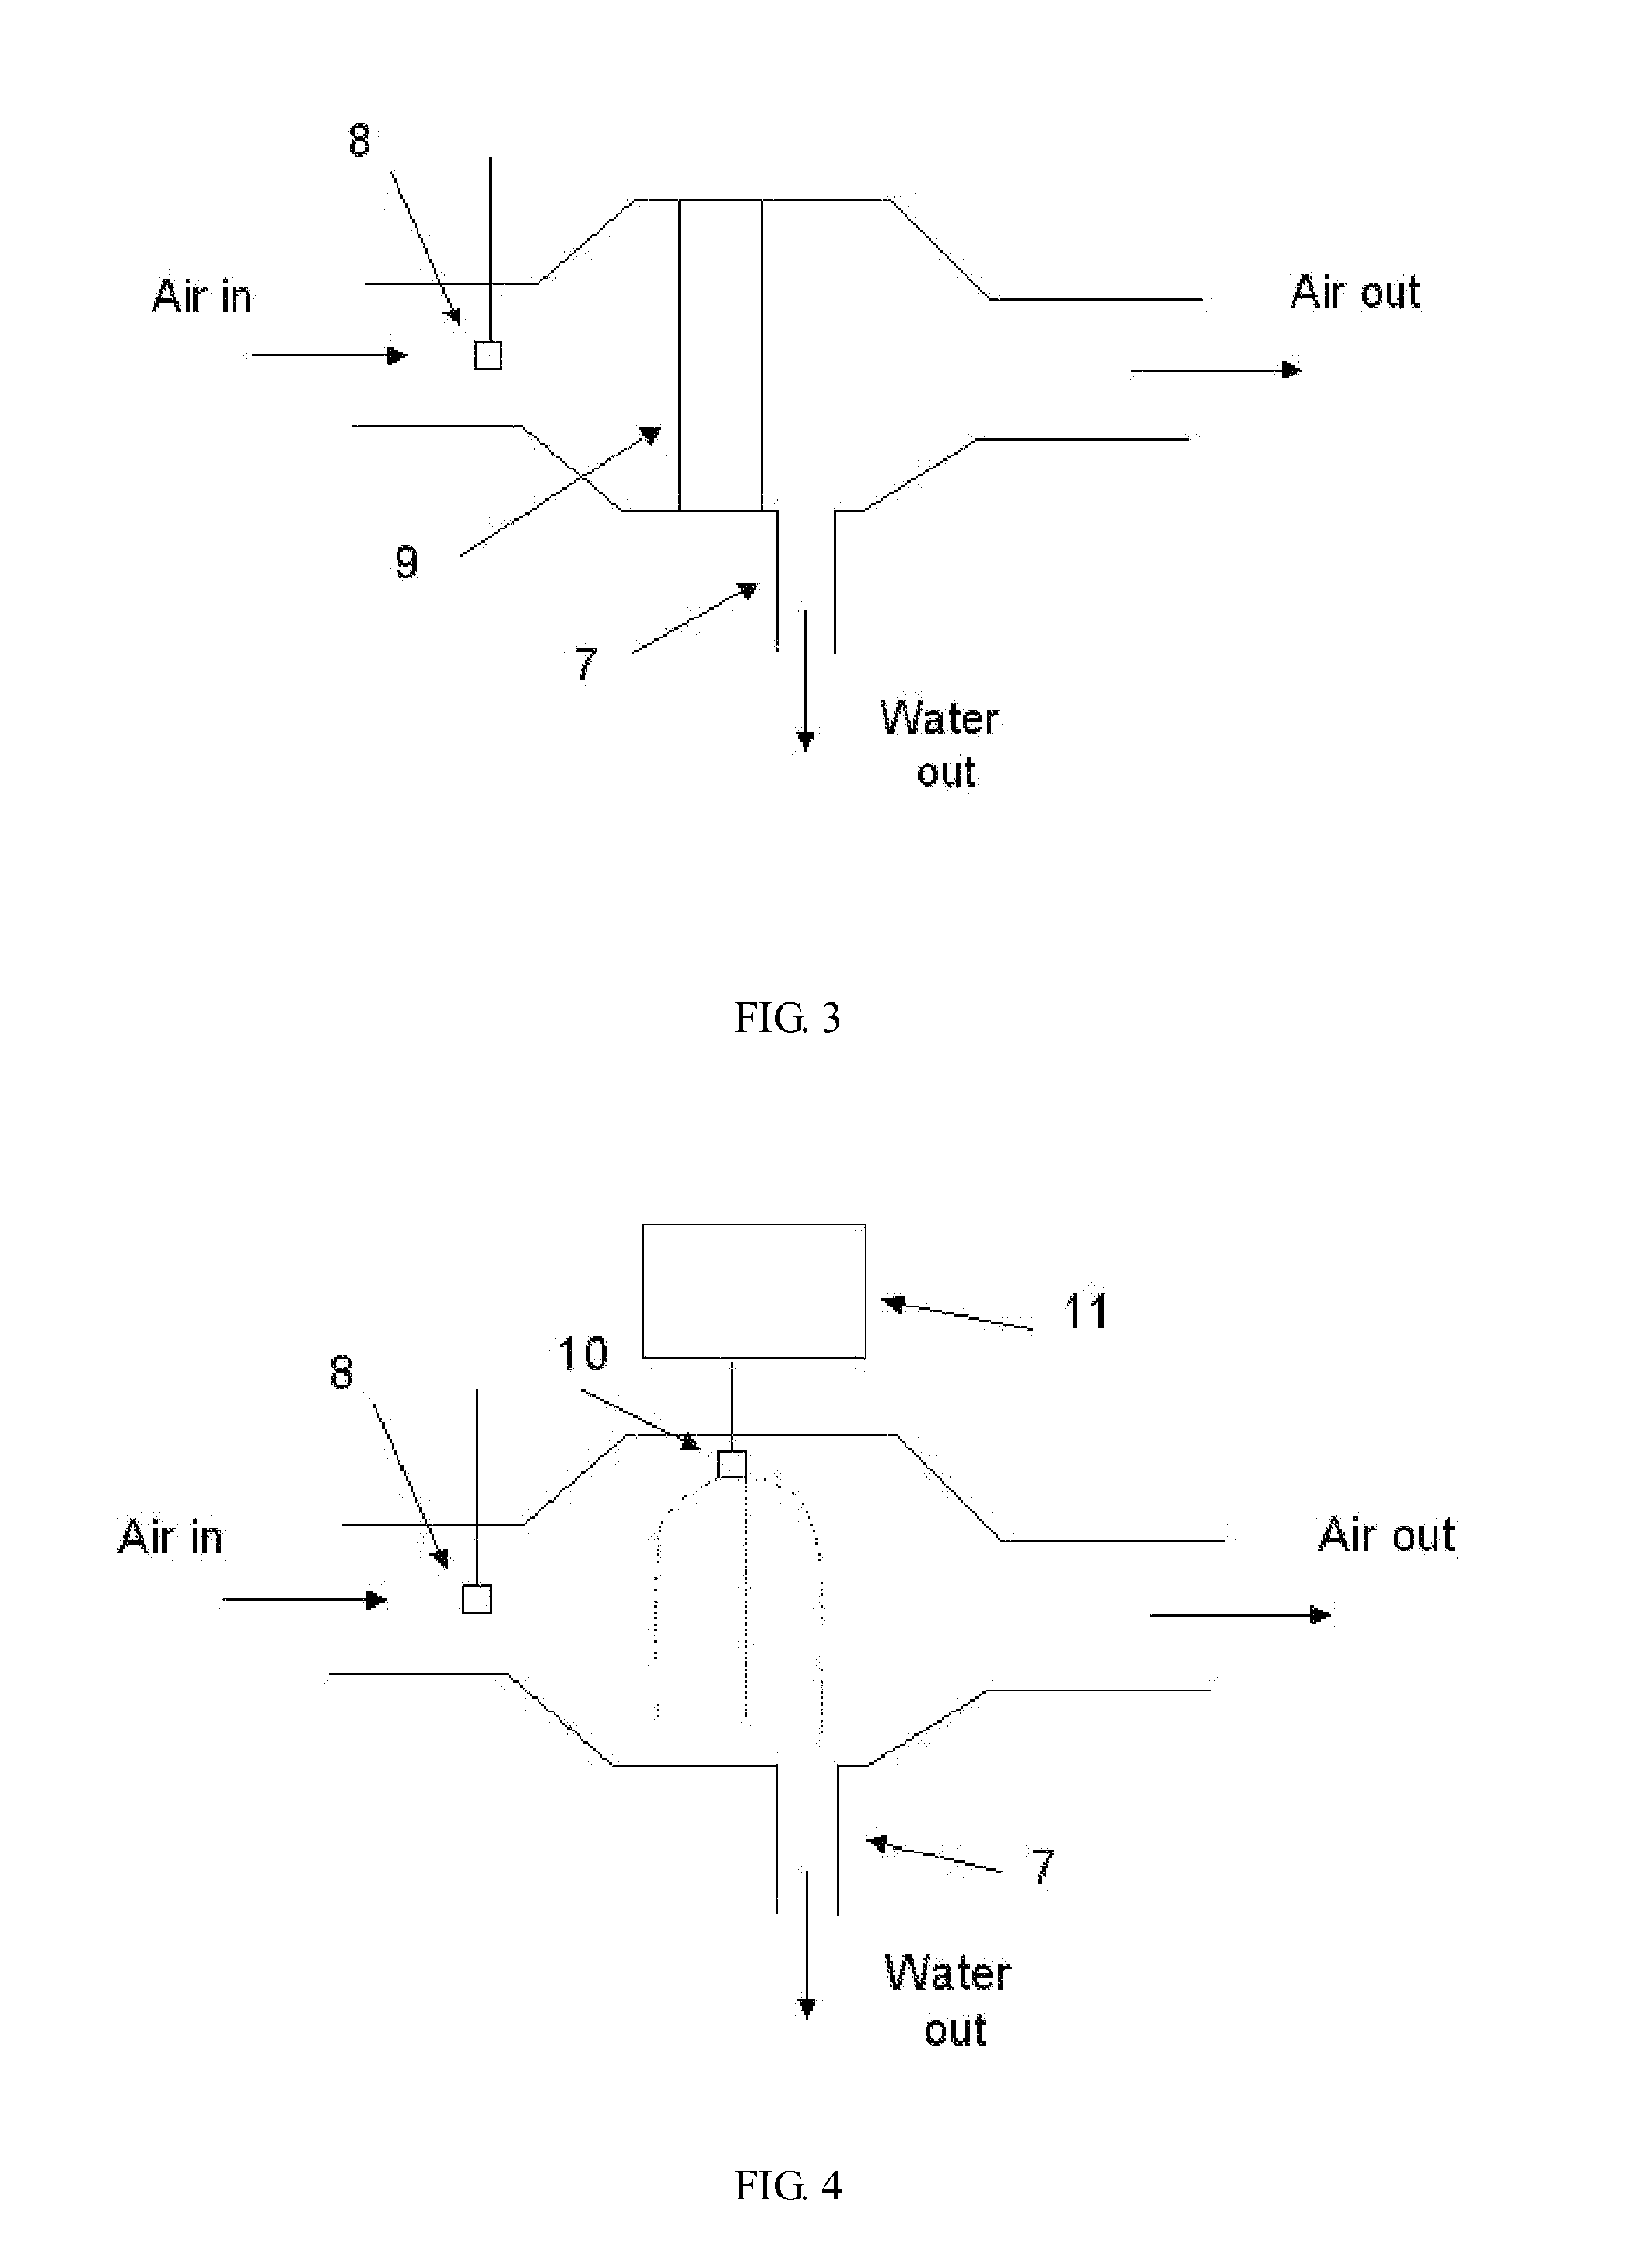 Method and Apparatus for Disinfecting and Deodorizing a Toilet System